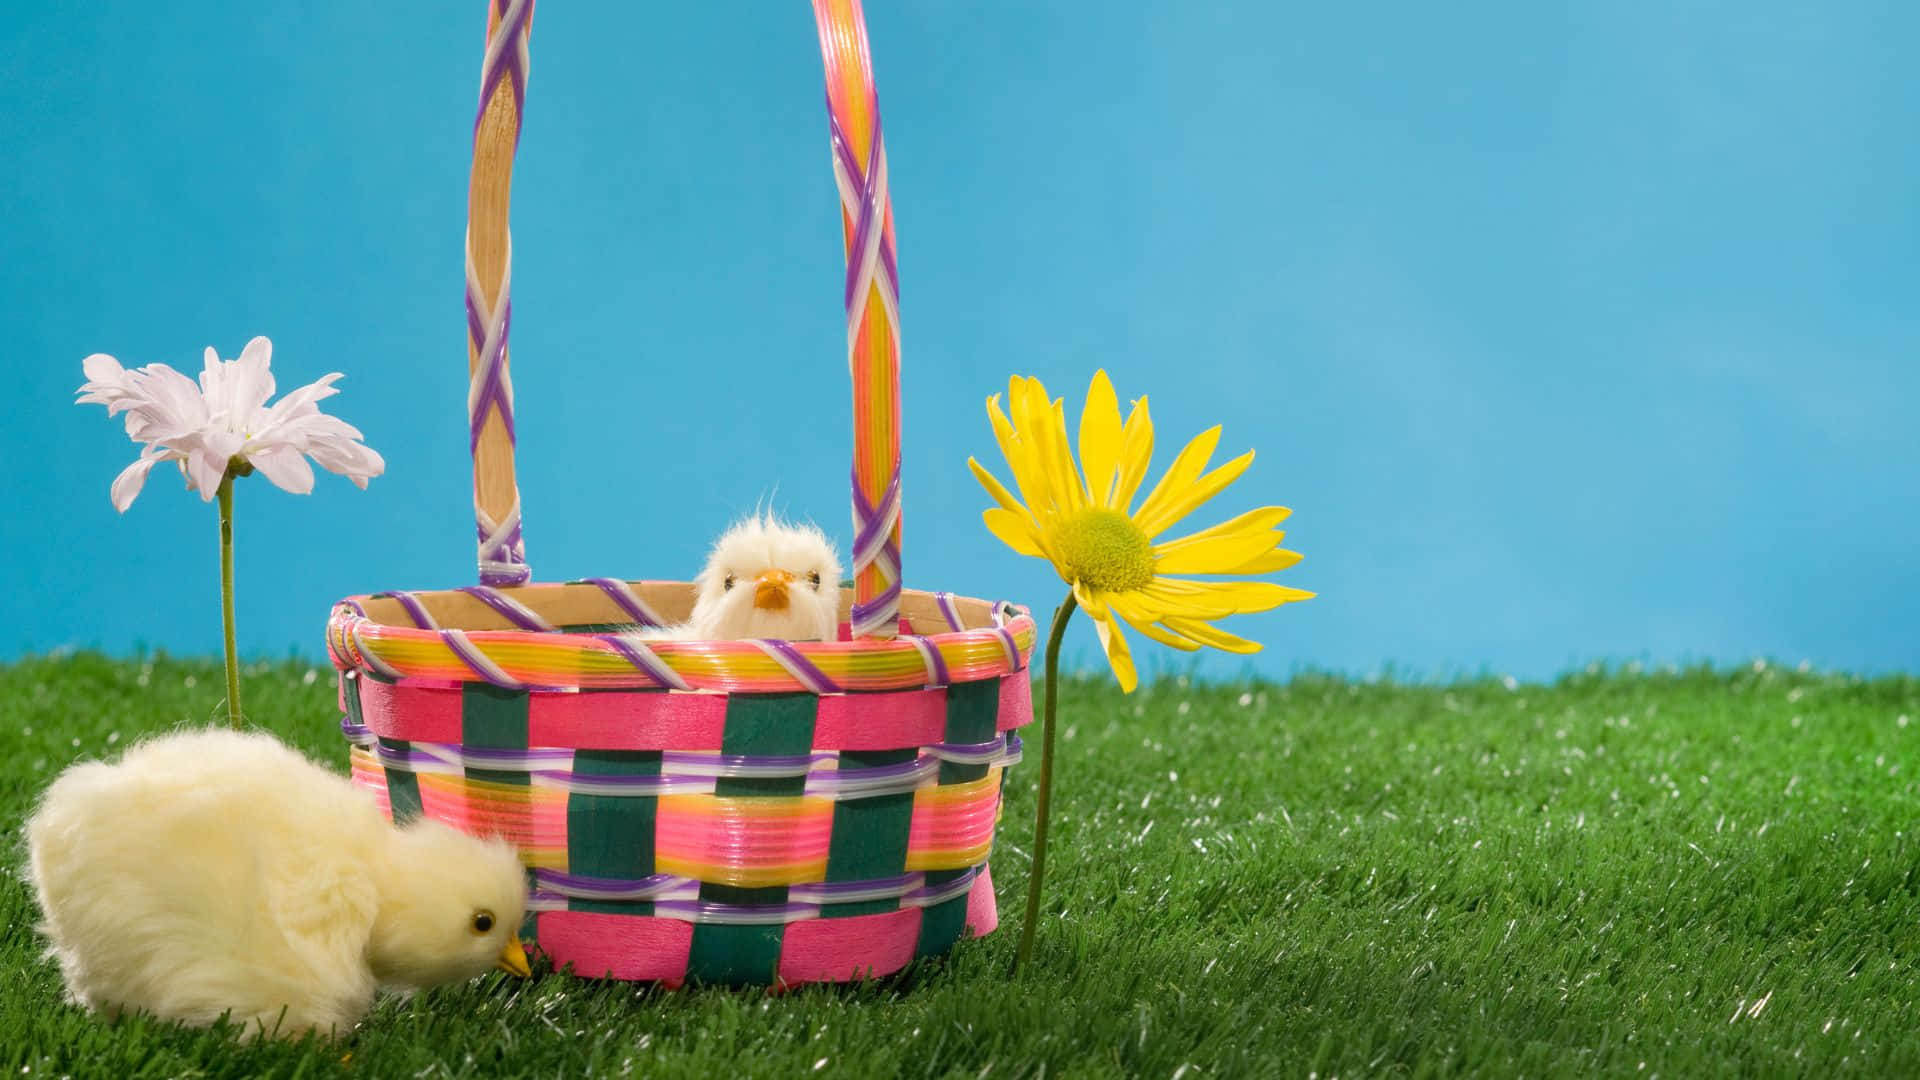 Easter Basket With Chicks And Flowers Wallpaper